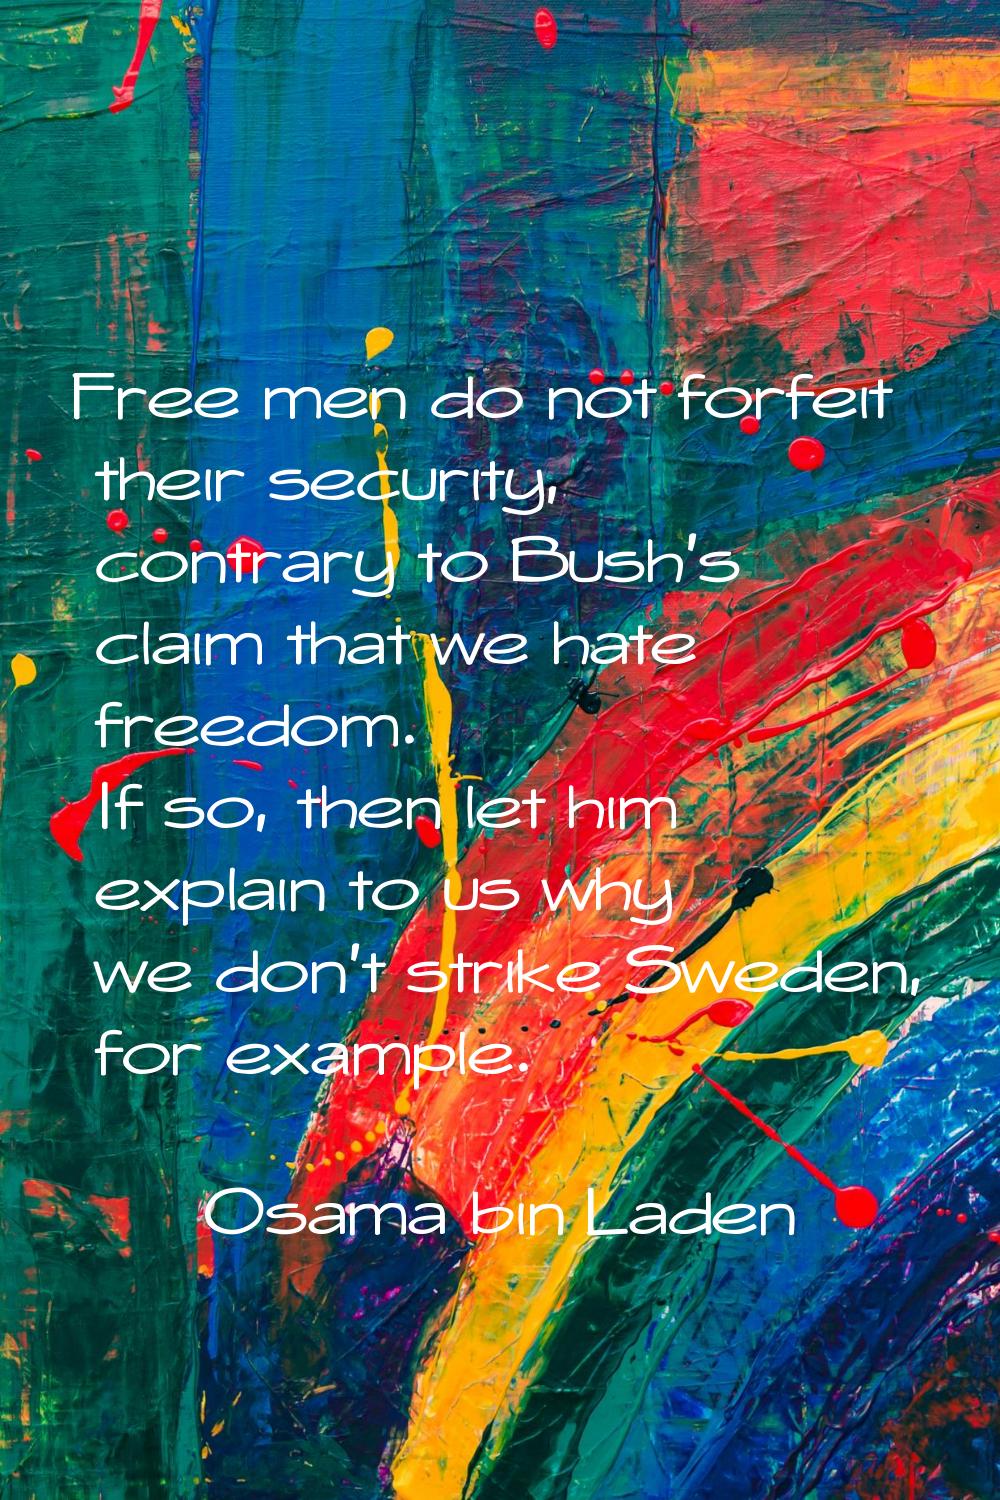 Free men do not forfeit their security, contrary to Bush's claim that we hate freedom. If so, then 